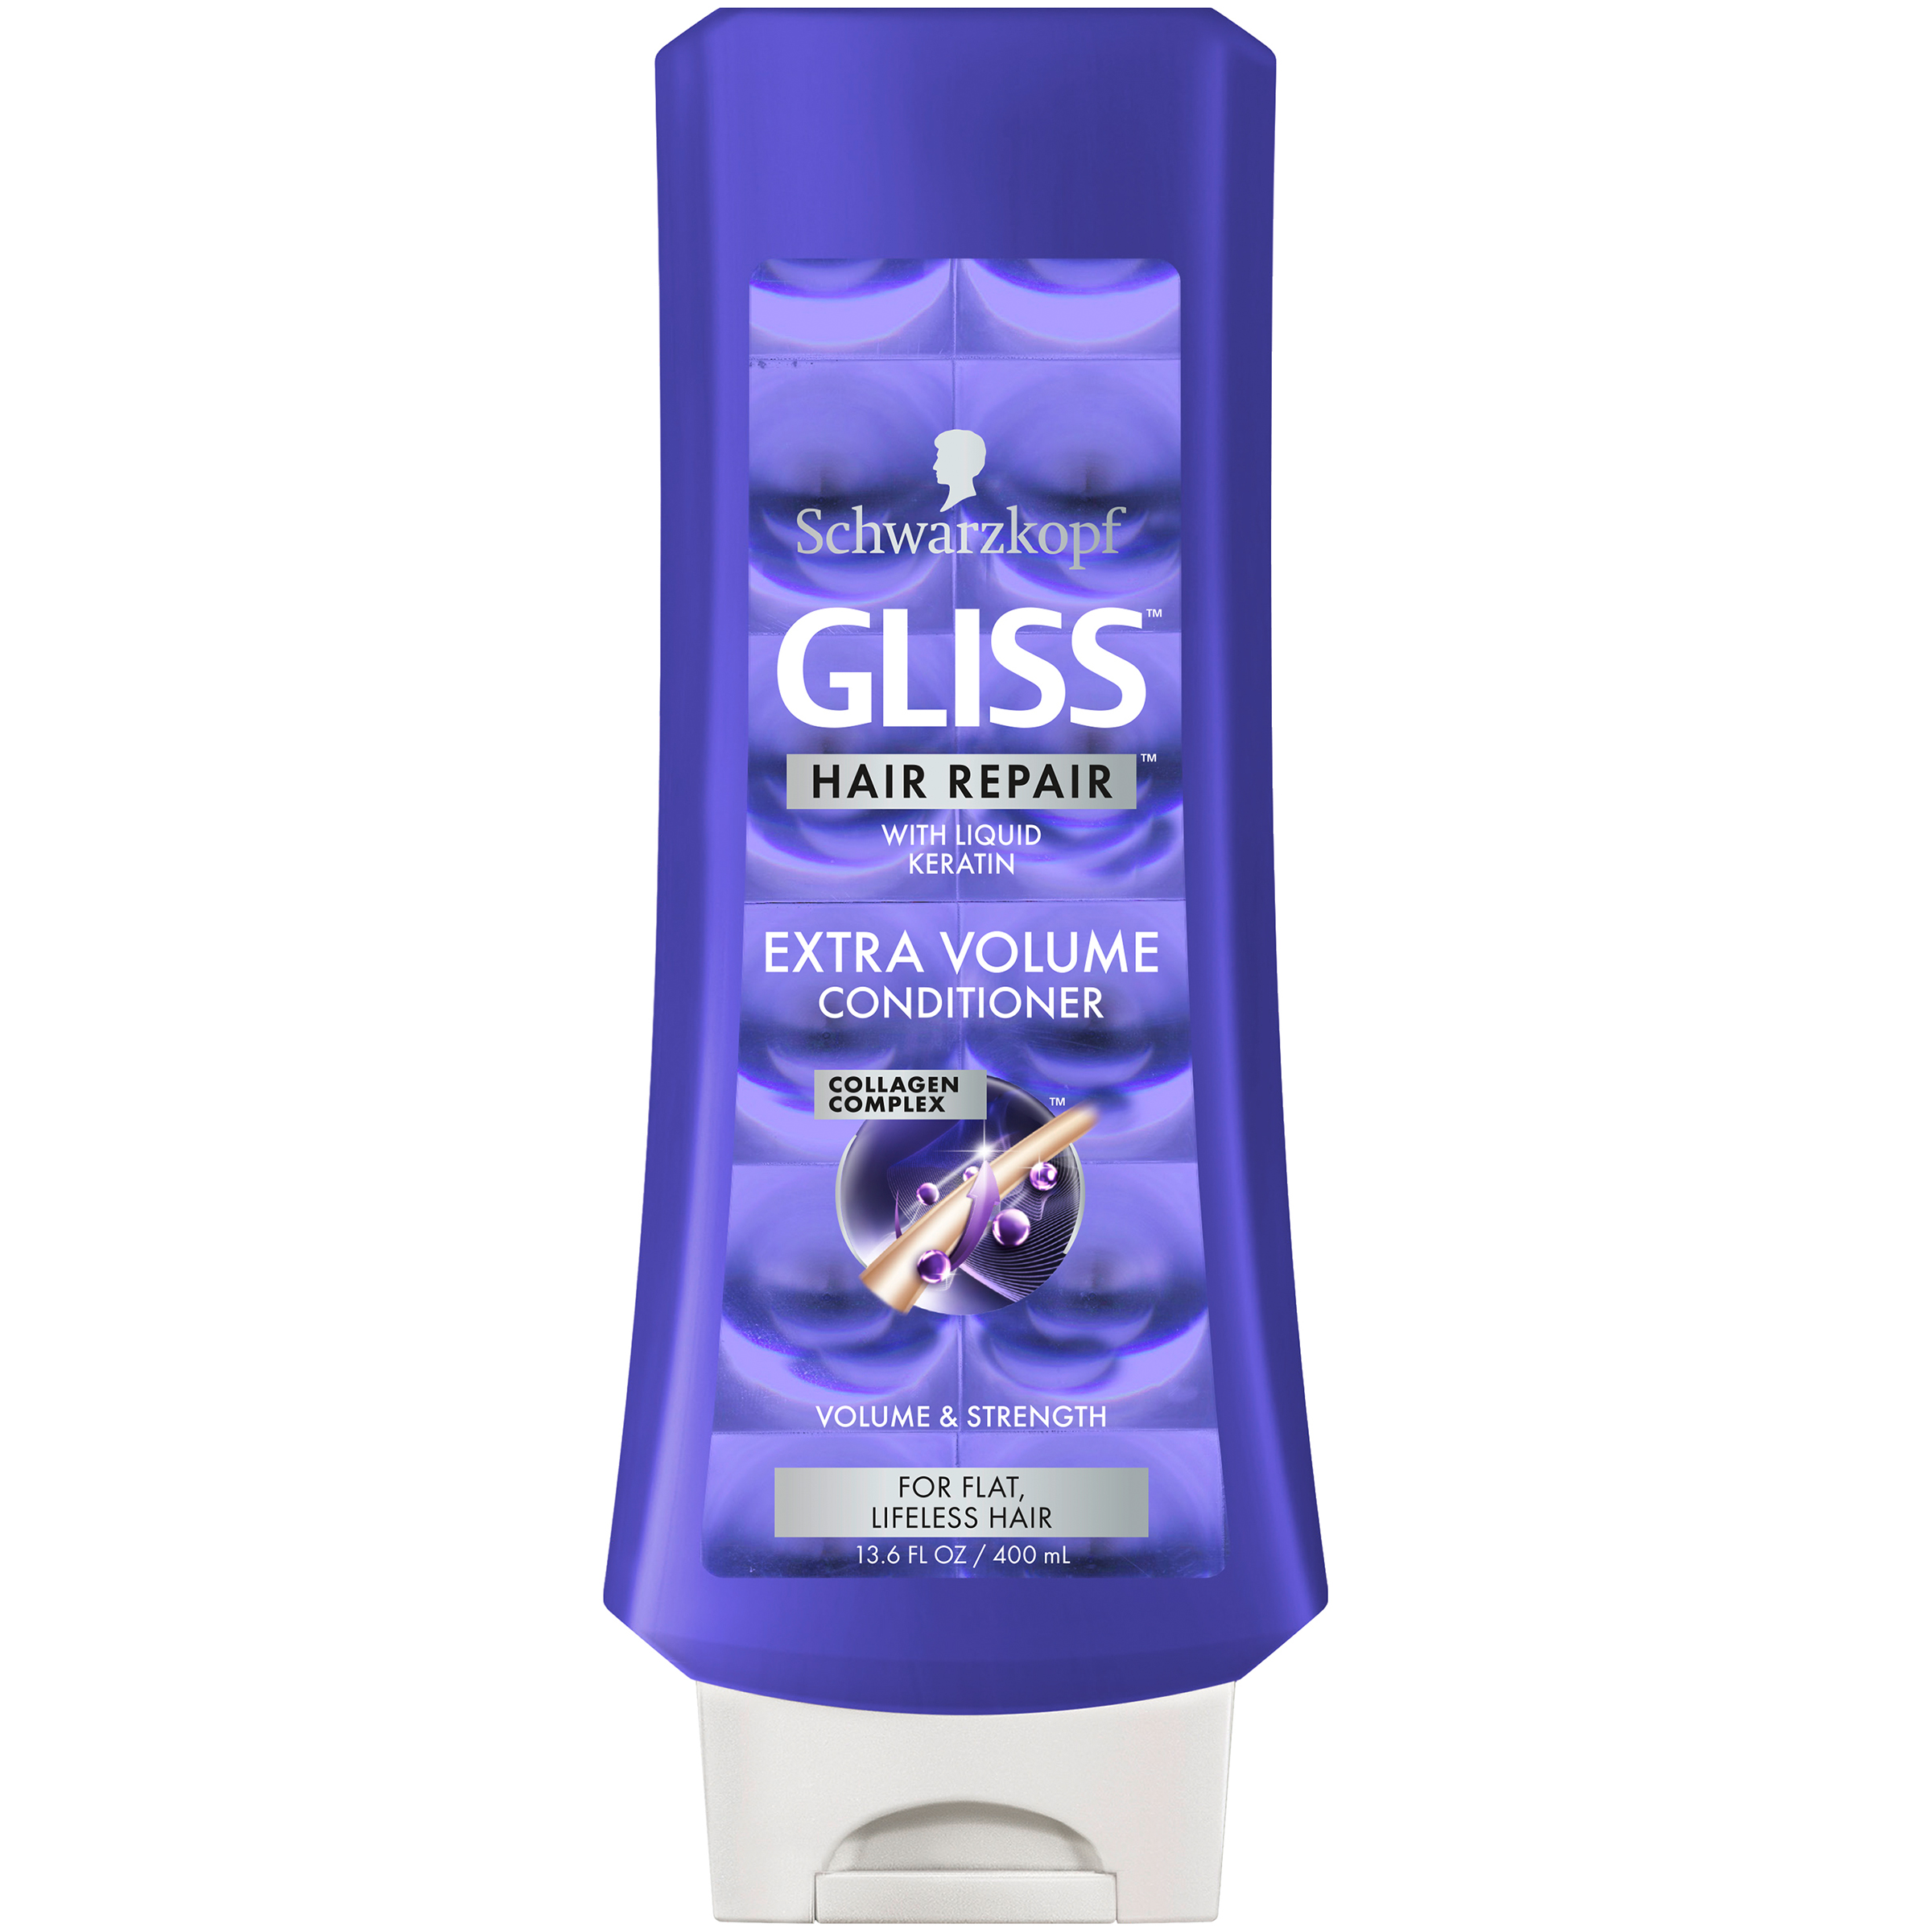 Gliss Hair Repair Conditioner, Extra Volume, 13.6 Ounce - image 1 of 5